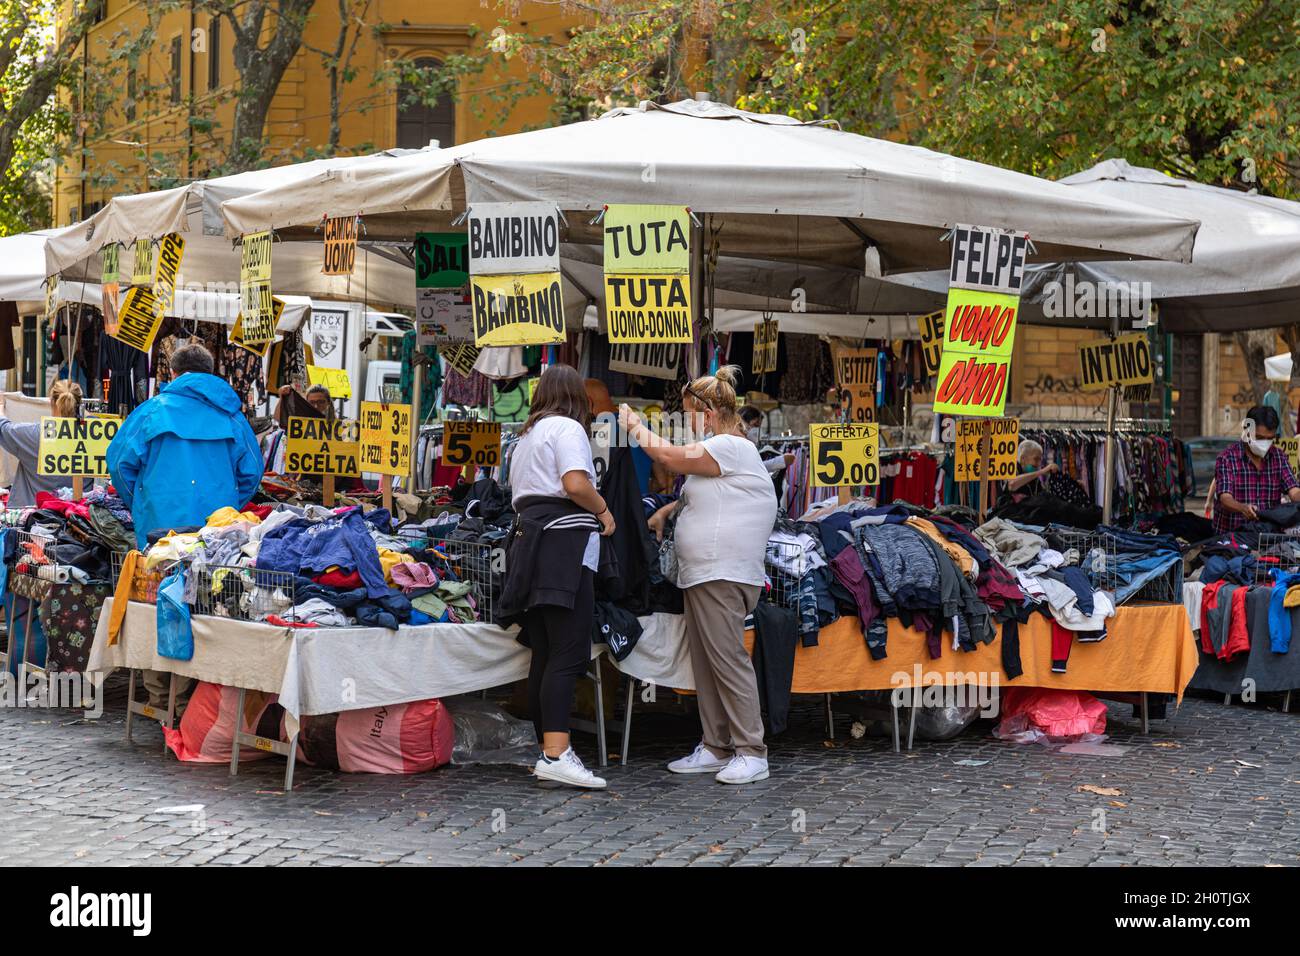 Street vendors selling budget clothes in Trastevere district of Rome, Italy  Stock Photo - Alamy